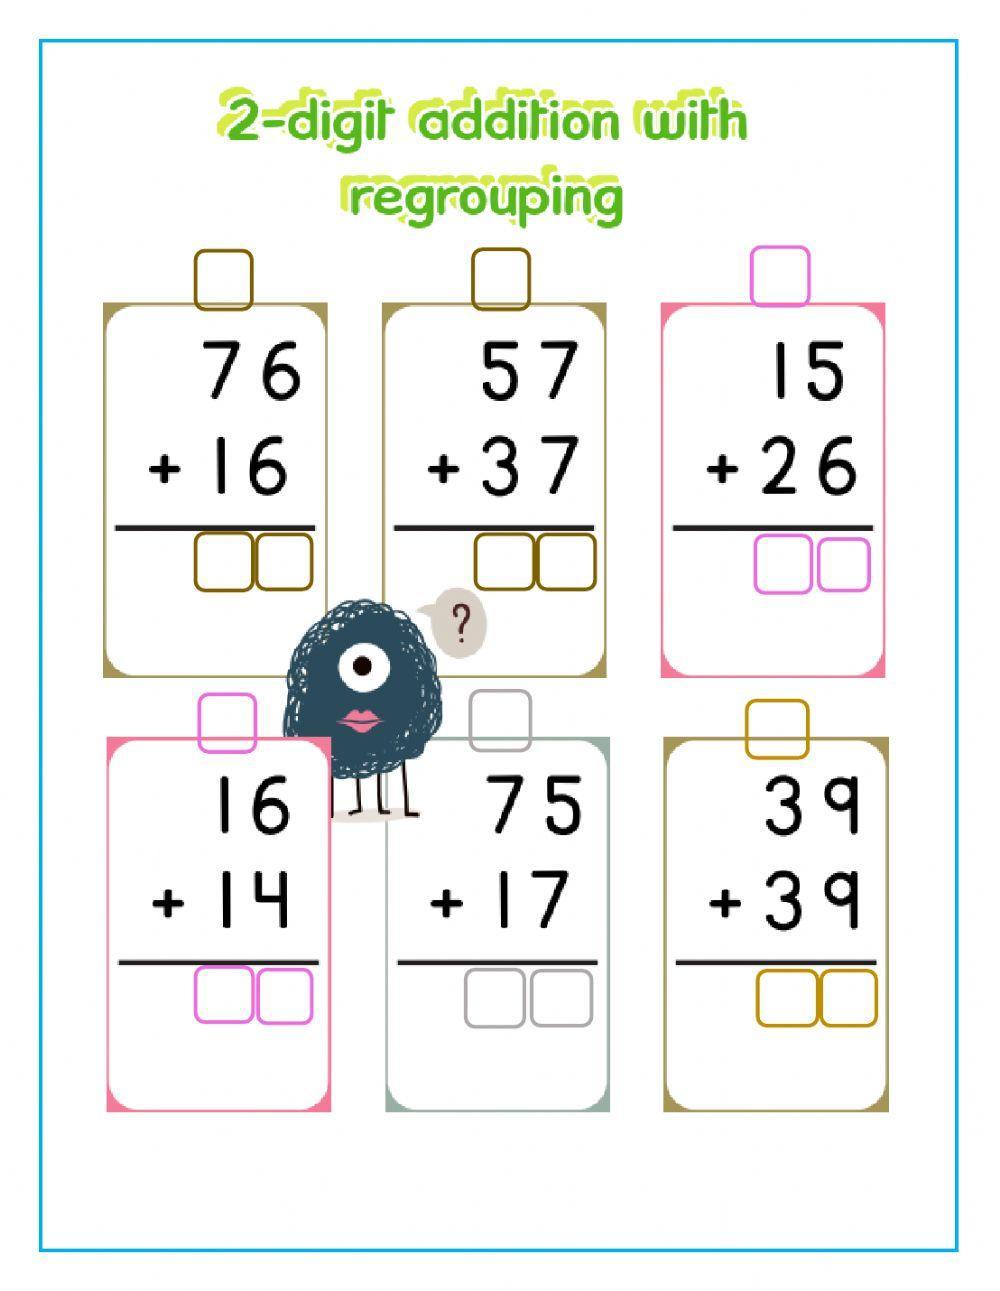 2-digit addition with regrouping